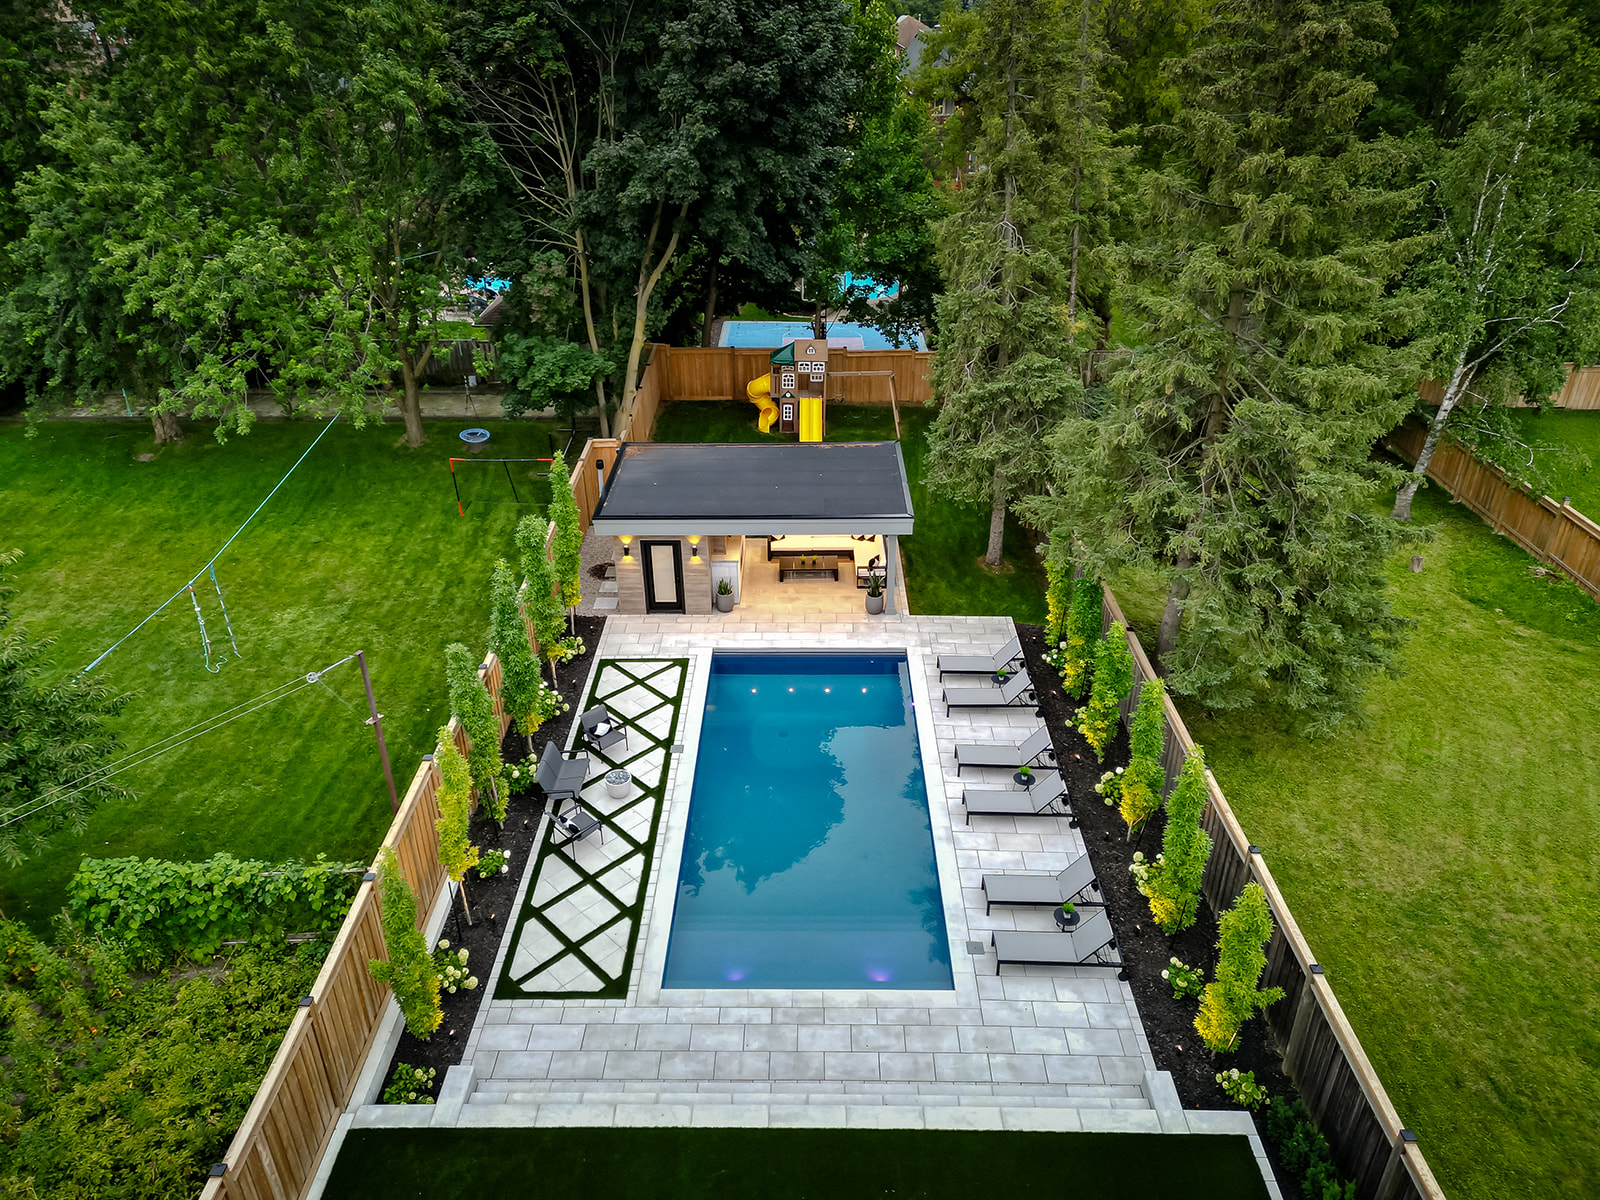 An inground pool with lounge chairs on the right and 3 chairs on the left.  Along the fences are trees planted.